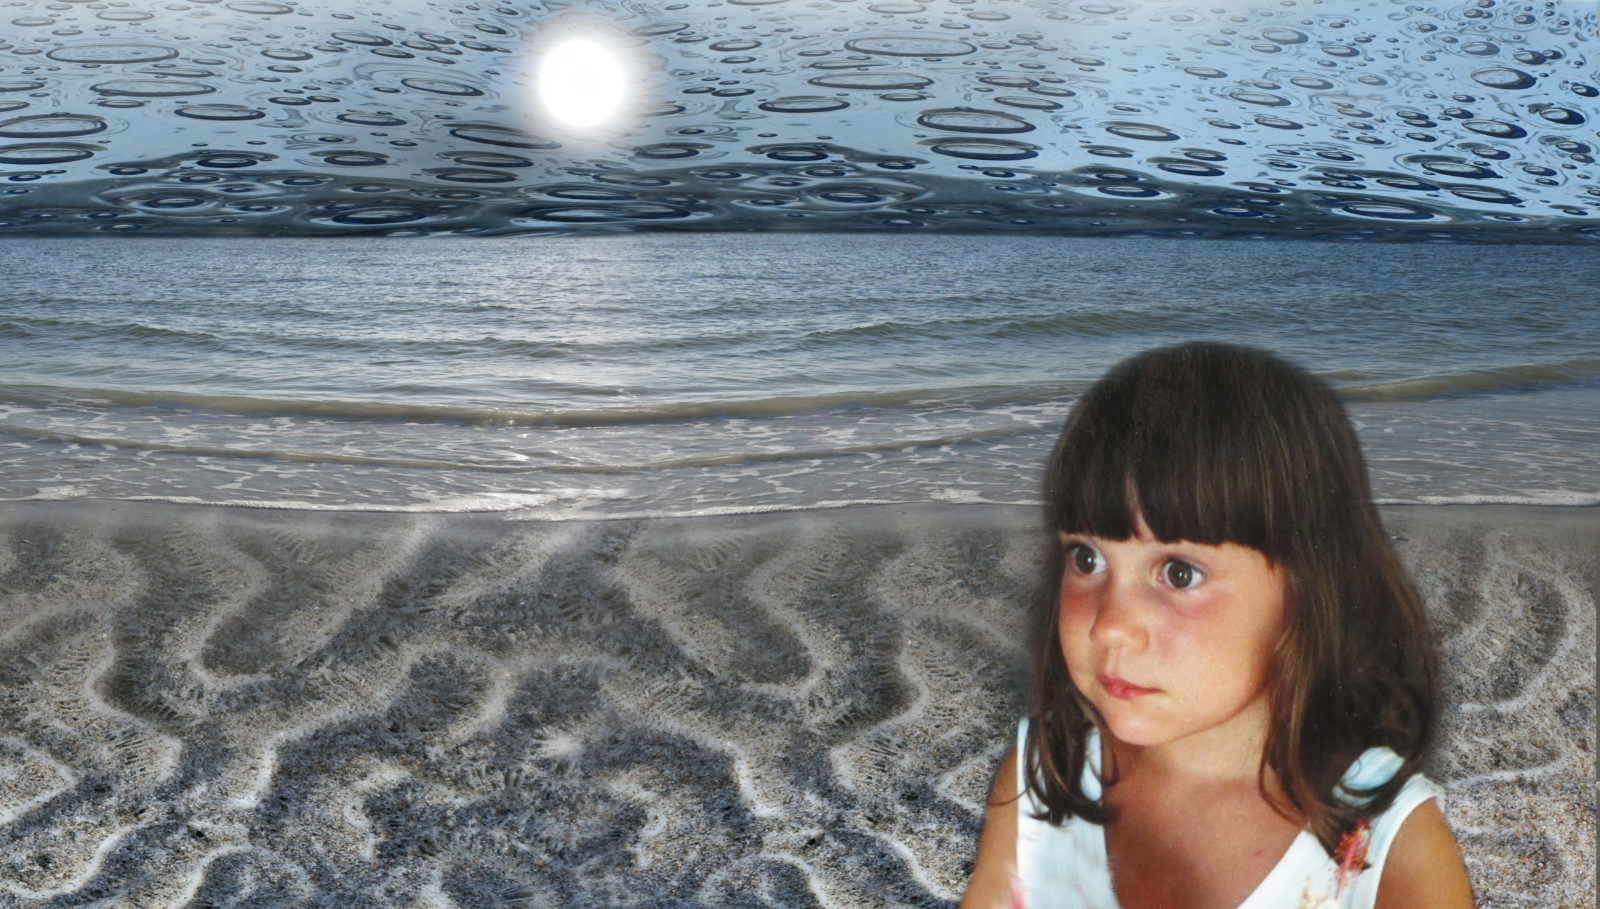 Marika Warden as a young on a moonlit beach, photoshopped by Robin Botie of Ithaca, New York